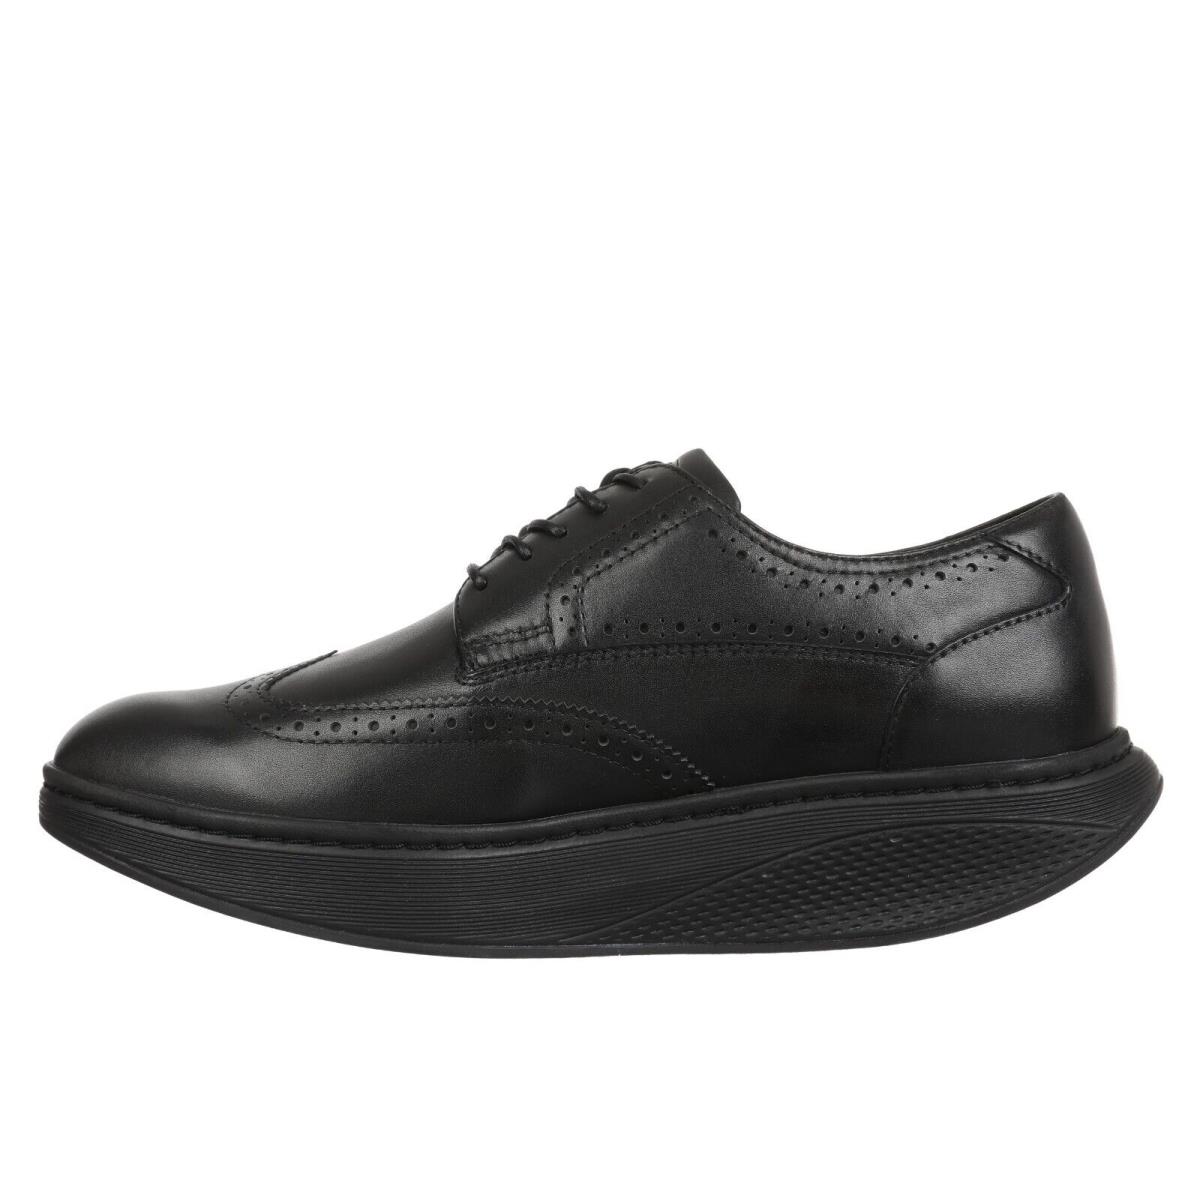 MBT shoes Wing - Black Calf Leather Manufacture 1